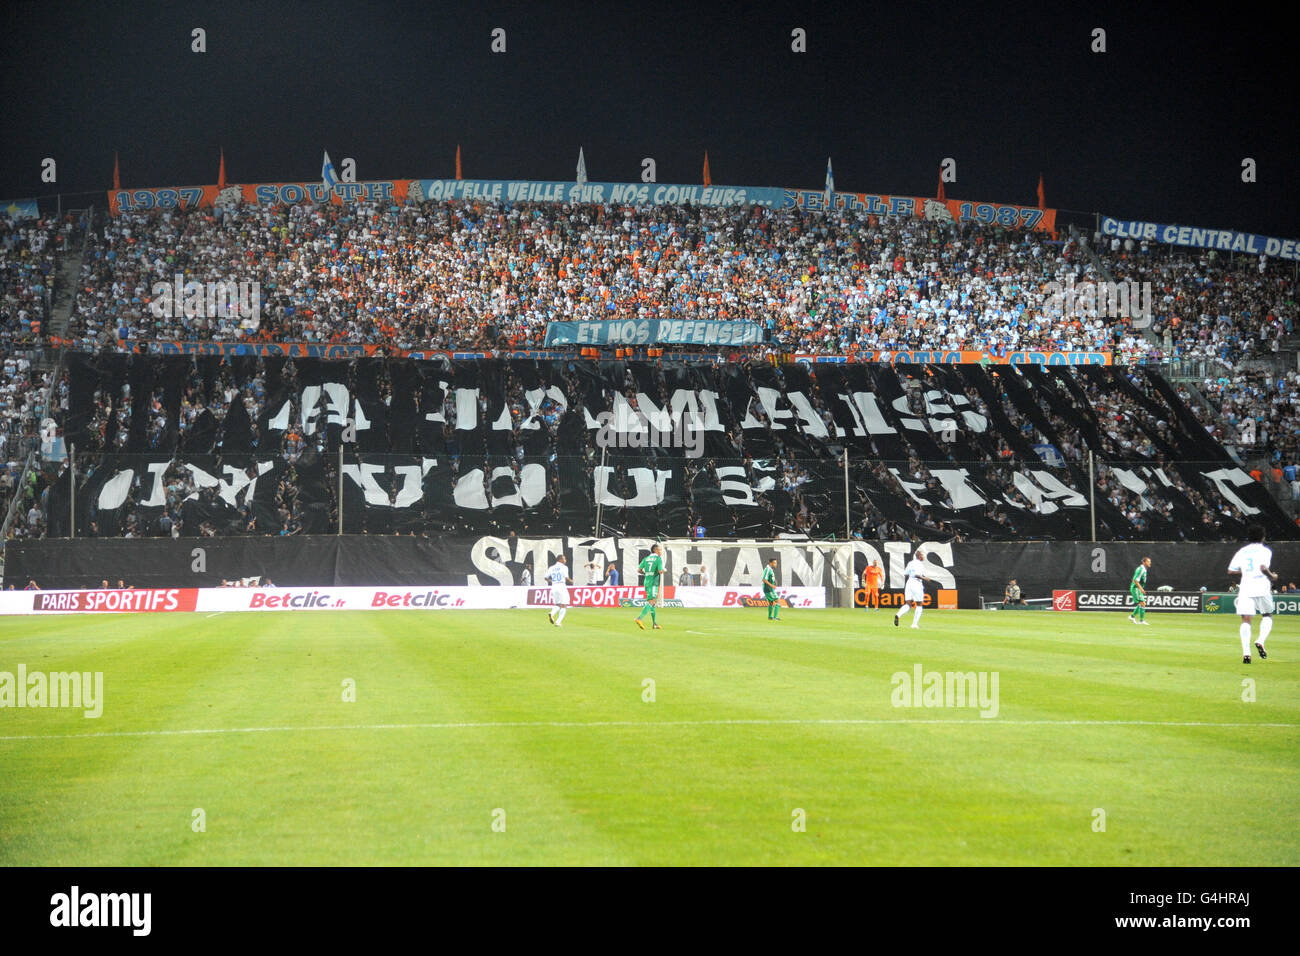 A general view of Olympique de Marseille fans in the stands Stock Photo